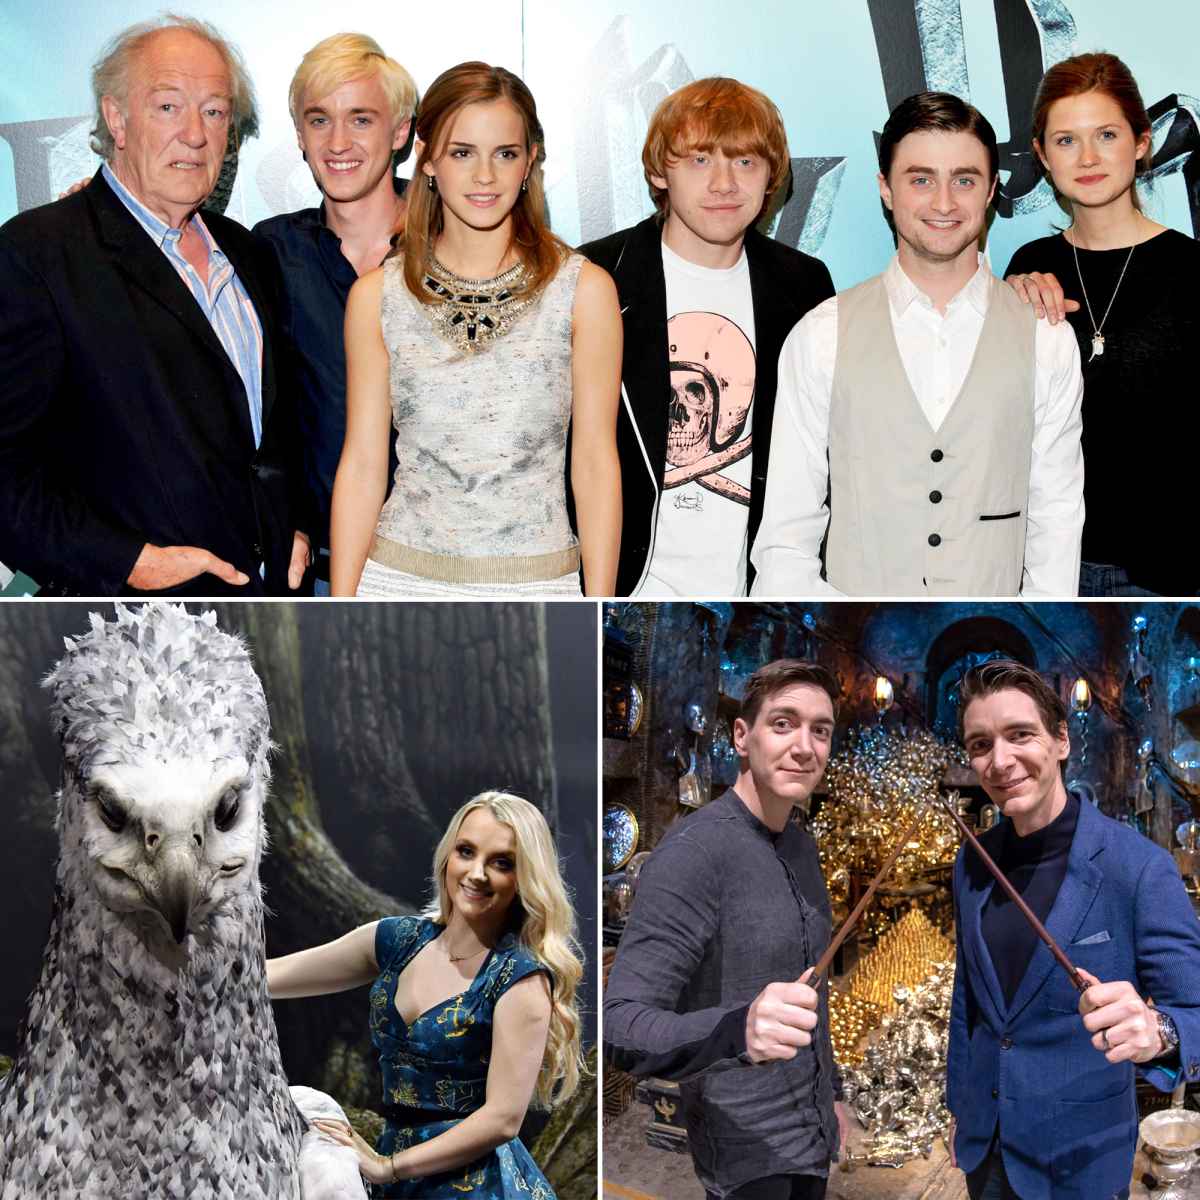 Meet the Cast of Harry Potter: The Wizarding Stars 2